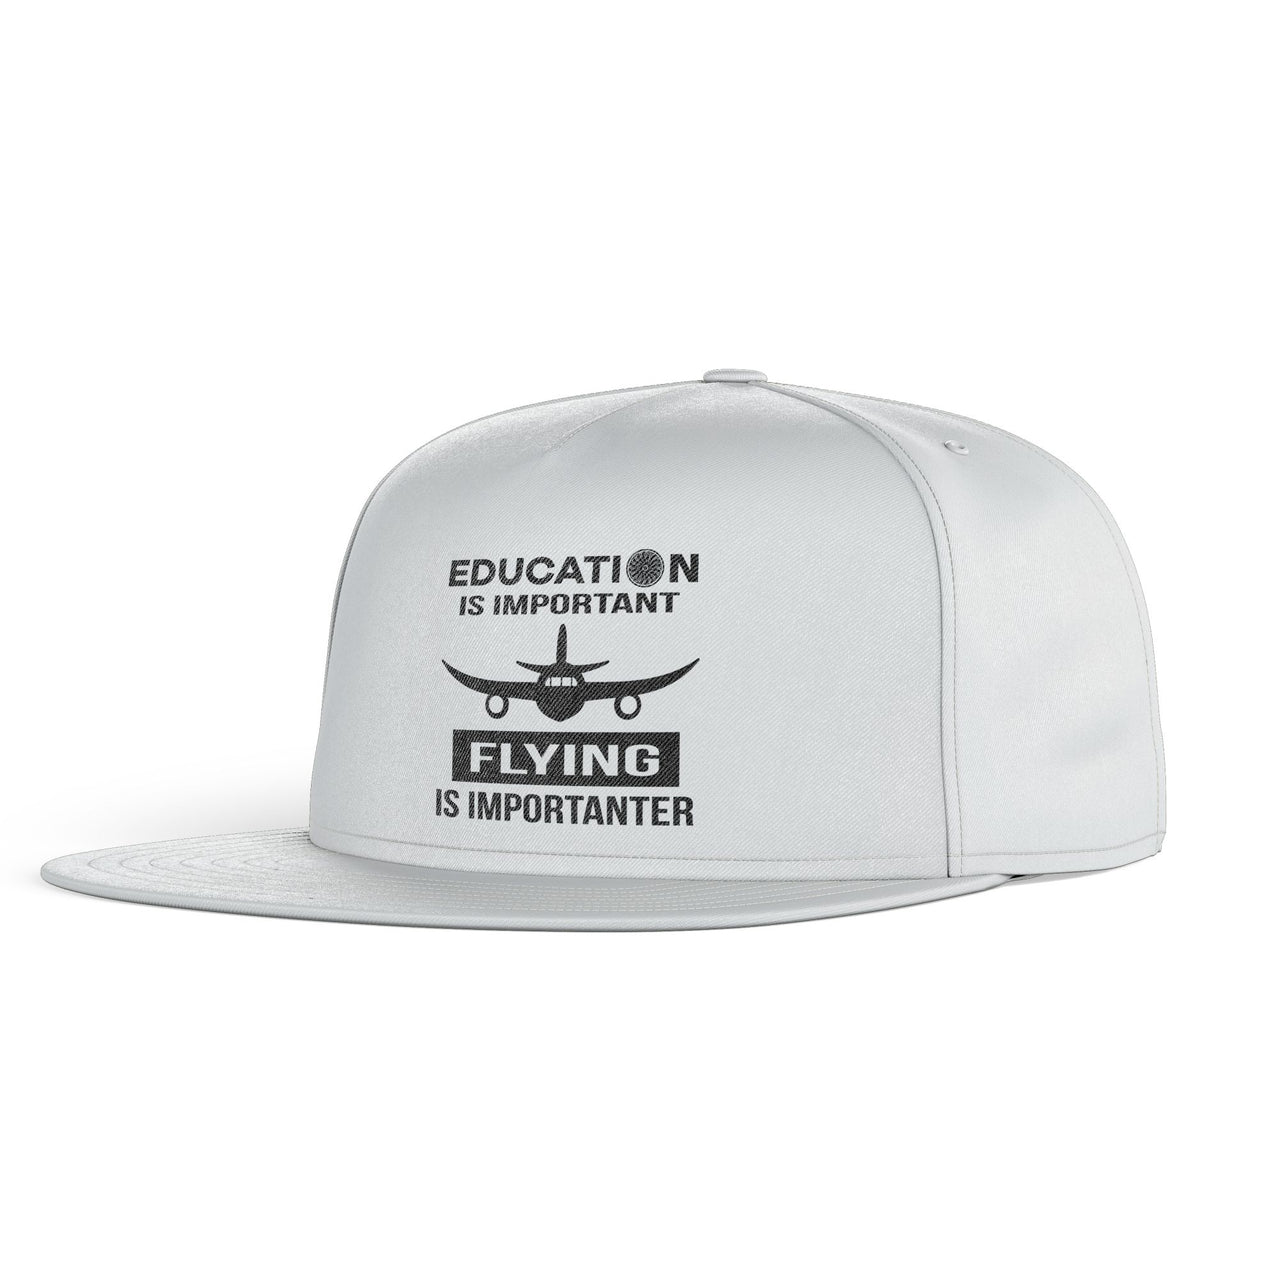 Flying is Importanter Designed Snapback Caps & Hats